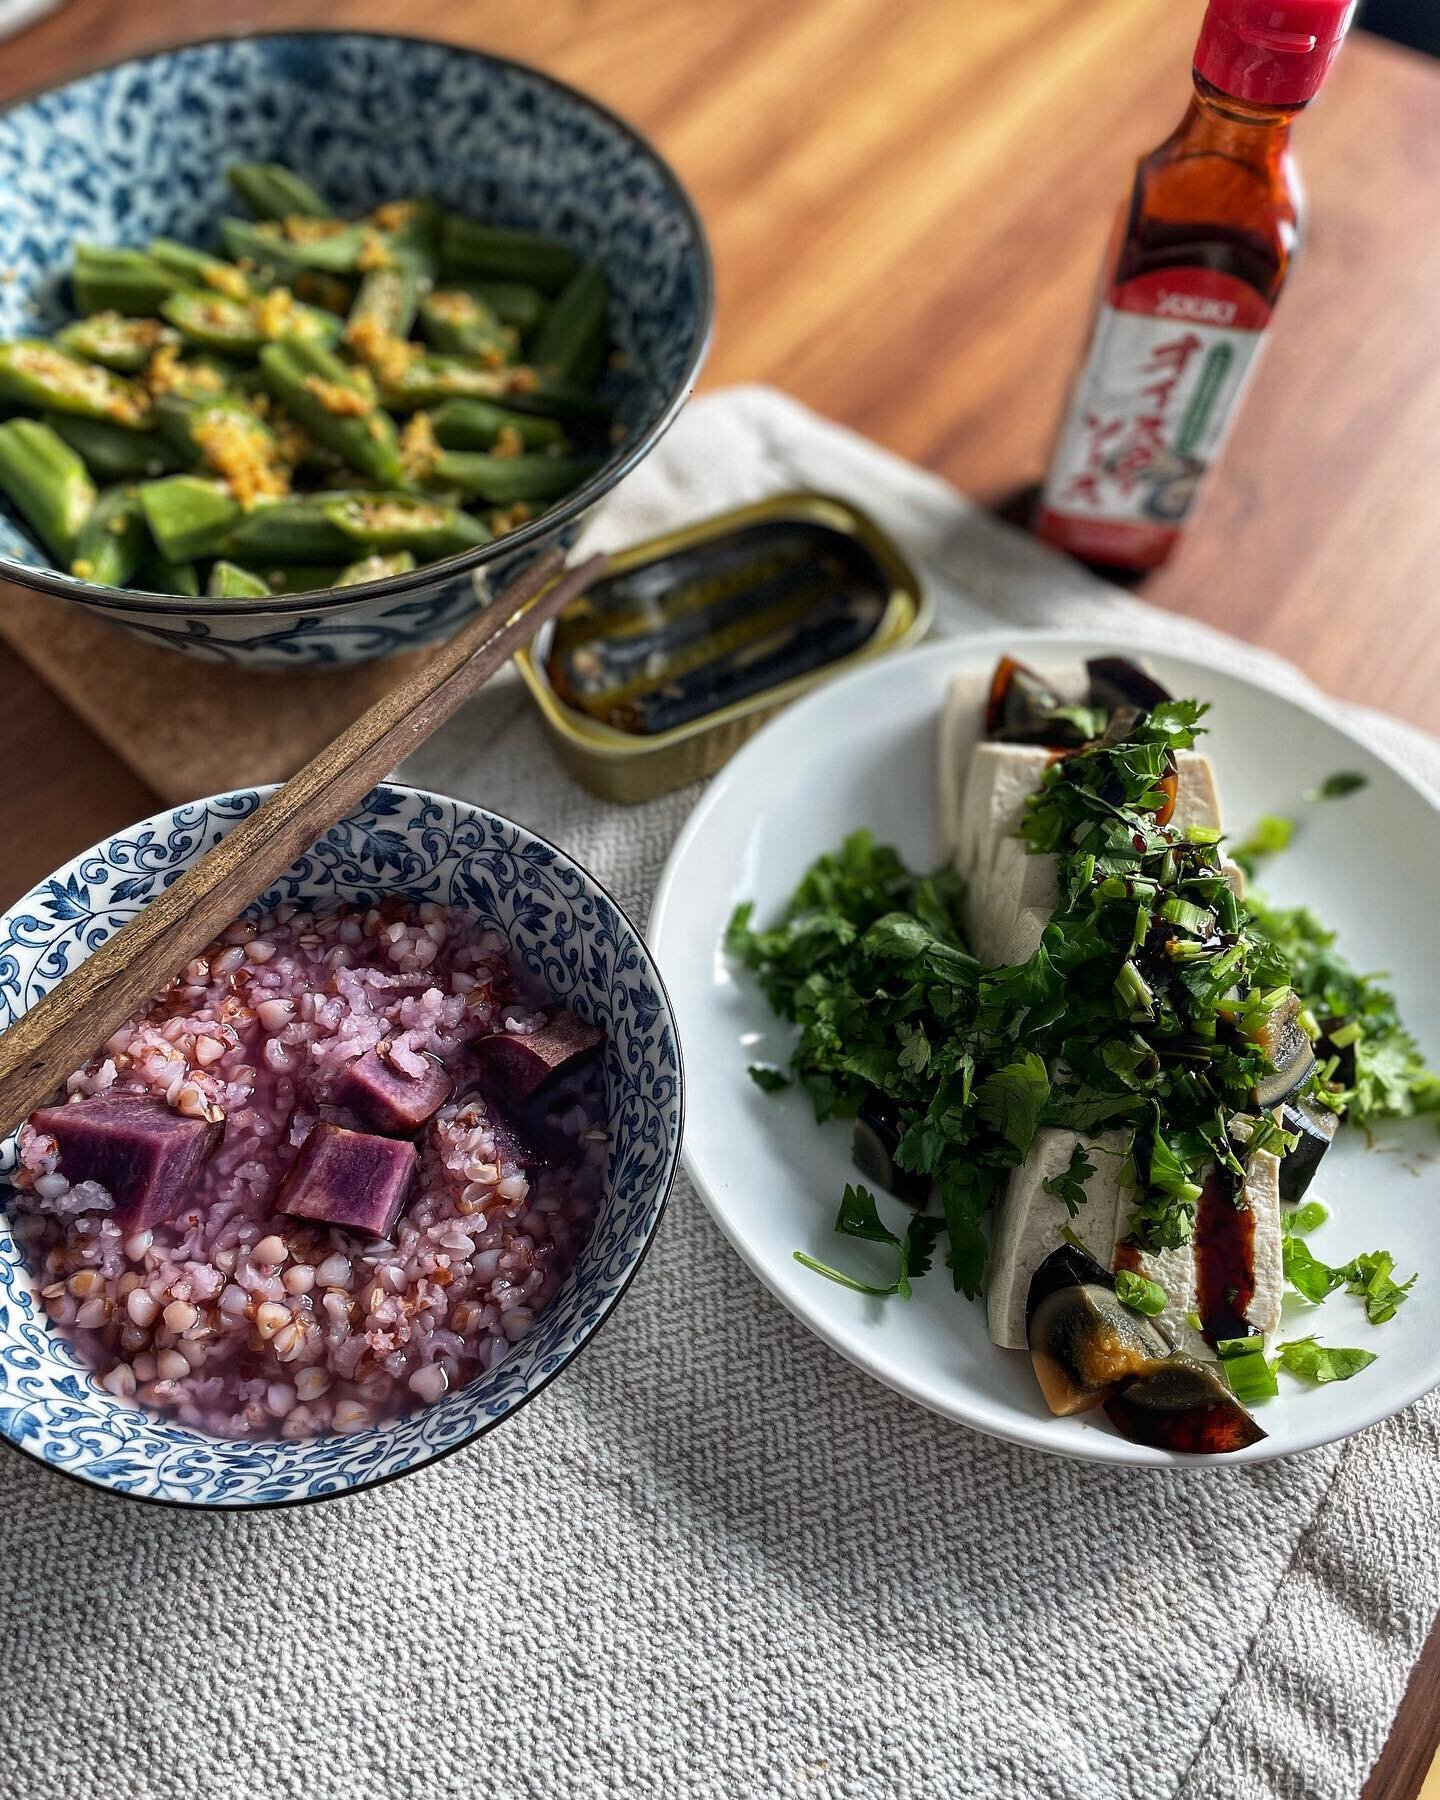 Simple sweet potato with rice porridge breakfast with preserved duck egg tofu + GF oyster sauce, sardines, and garlic okra.

.

Porridge breakfast is always a treat. For anyone on a low-carb diet - a pot of porridge for 2 typically uses 1/3 cup of ri